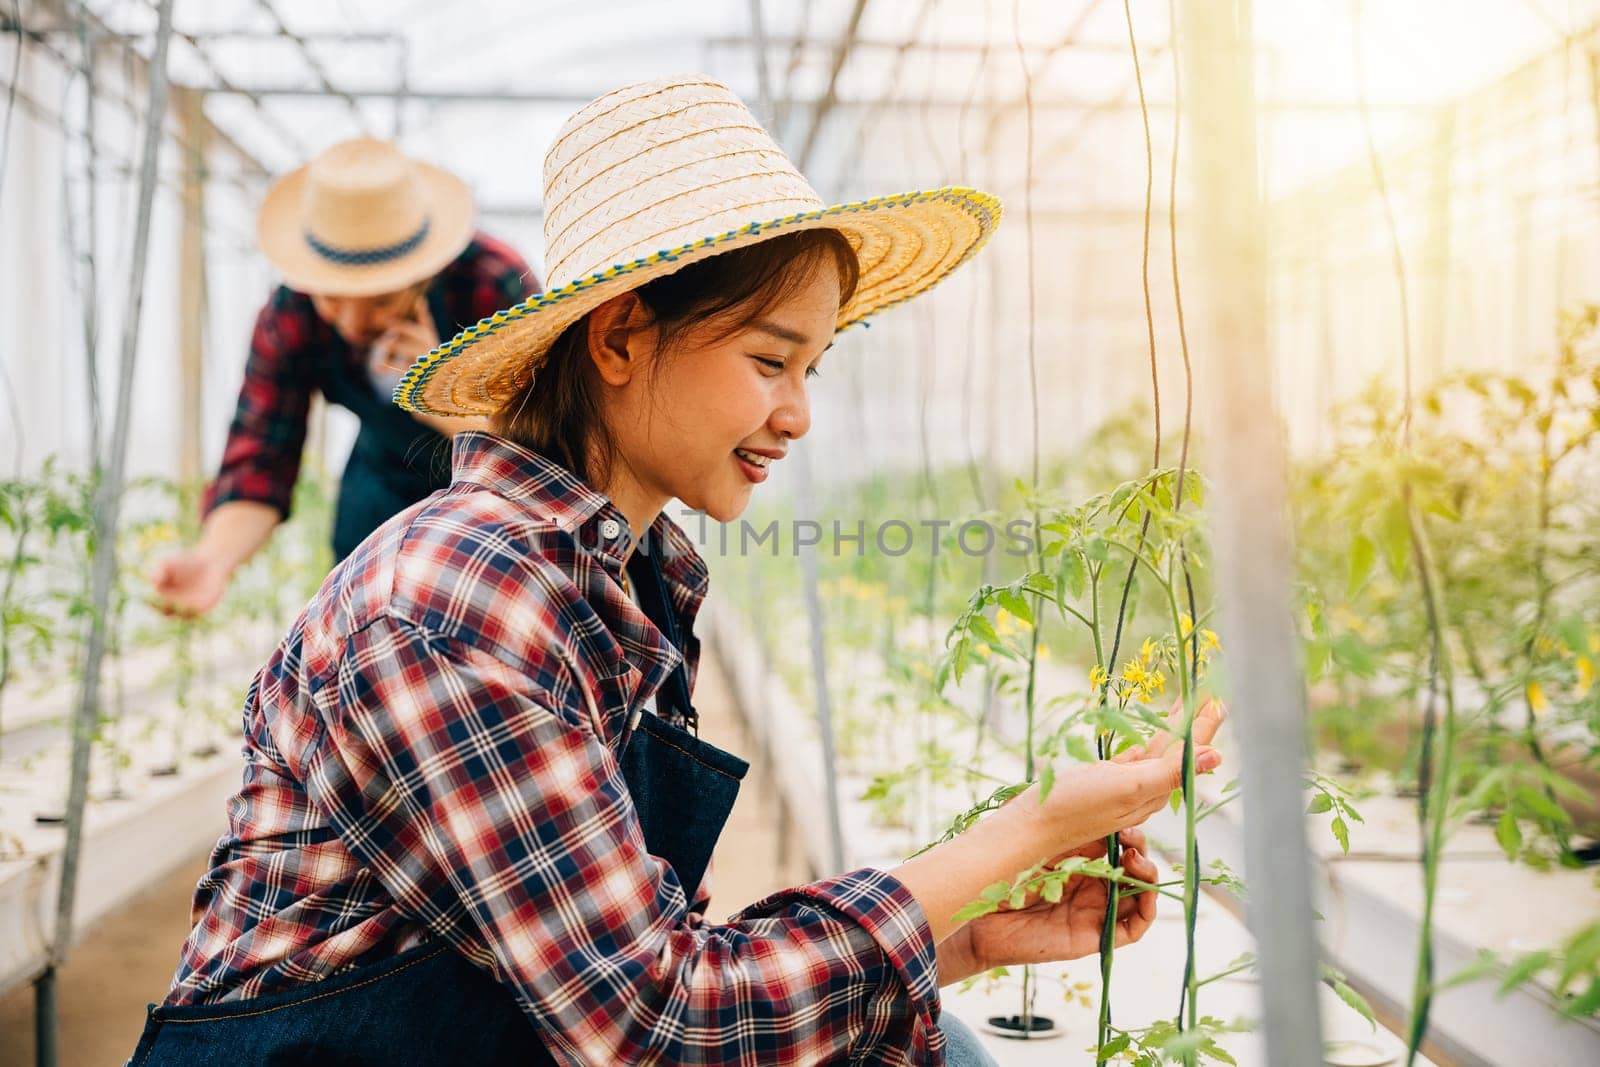 Greenhouse owner a woman checks tomato plants for quality using modern technology. As an entrepreneur and scientist she ensures optimal growth showcasing happiness in her vegetable farm environment.